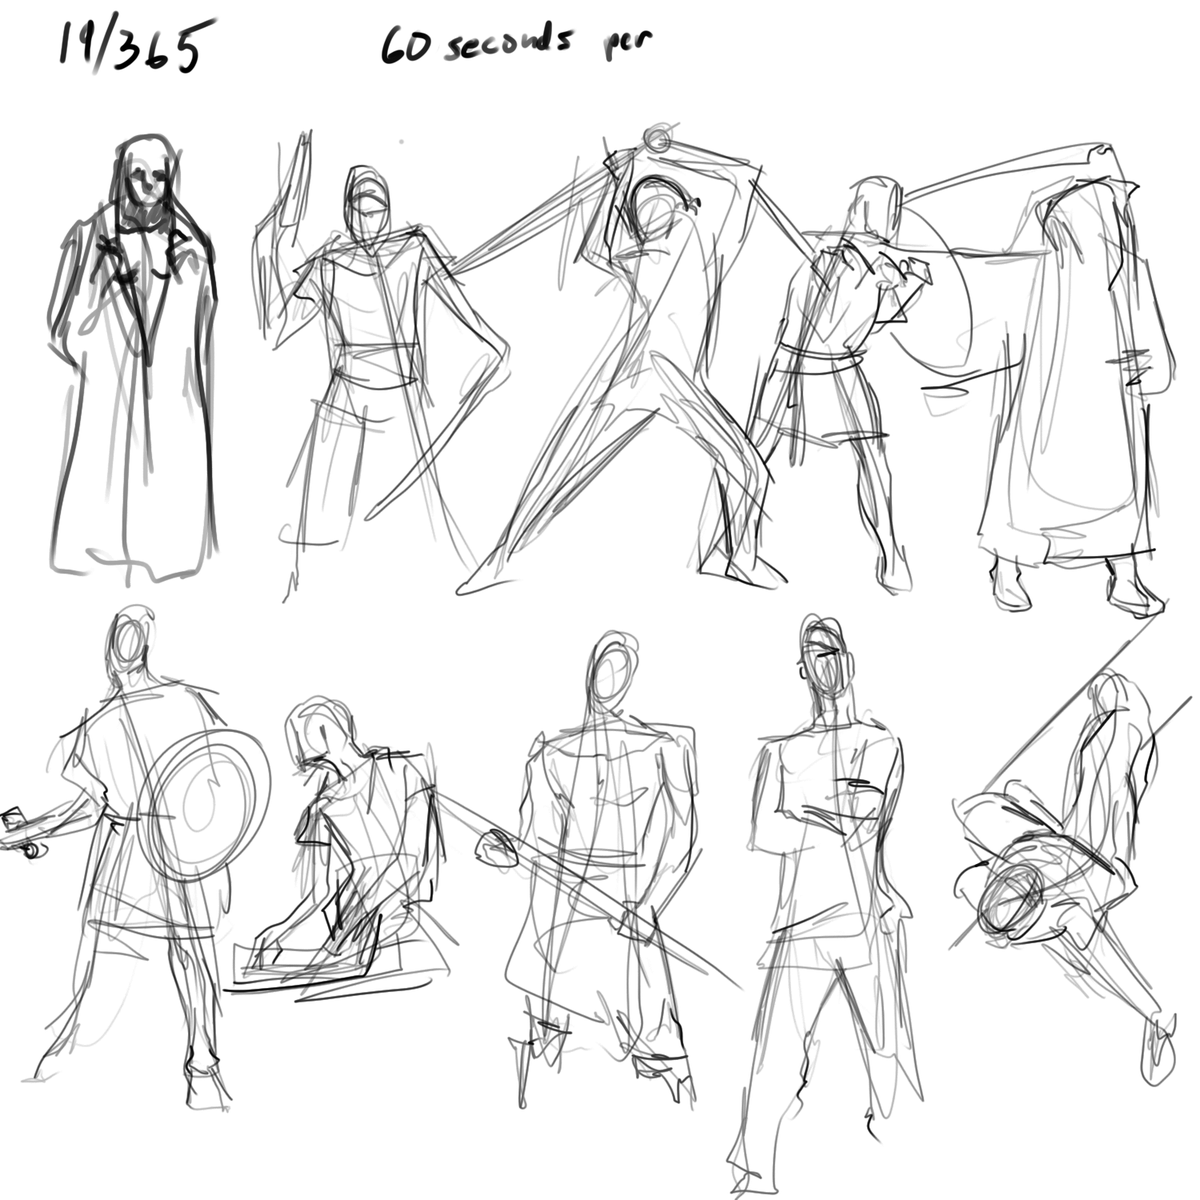 gesture sketches 60 seconds from stream 